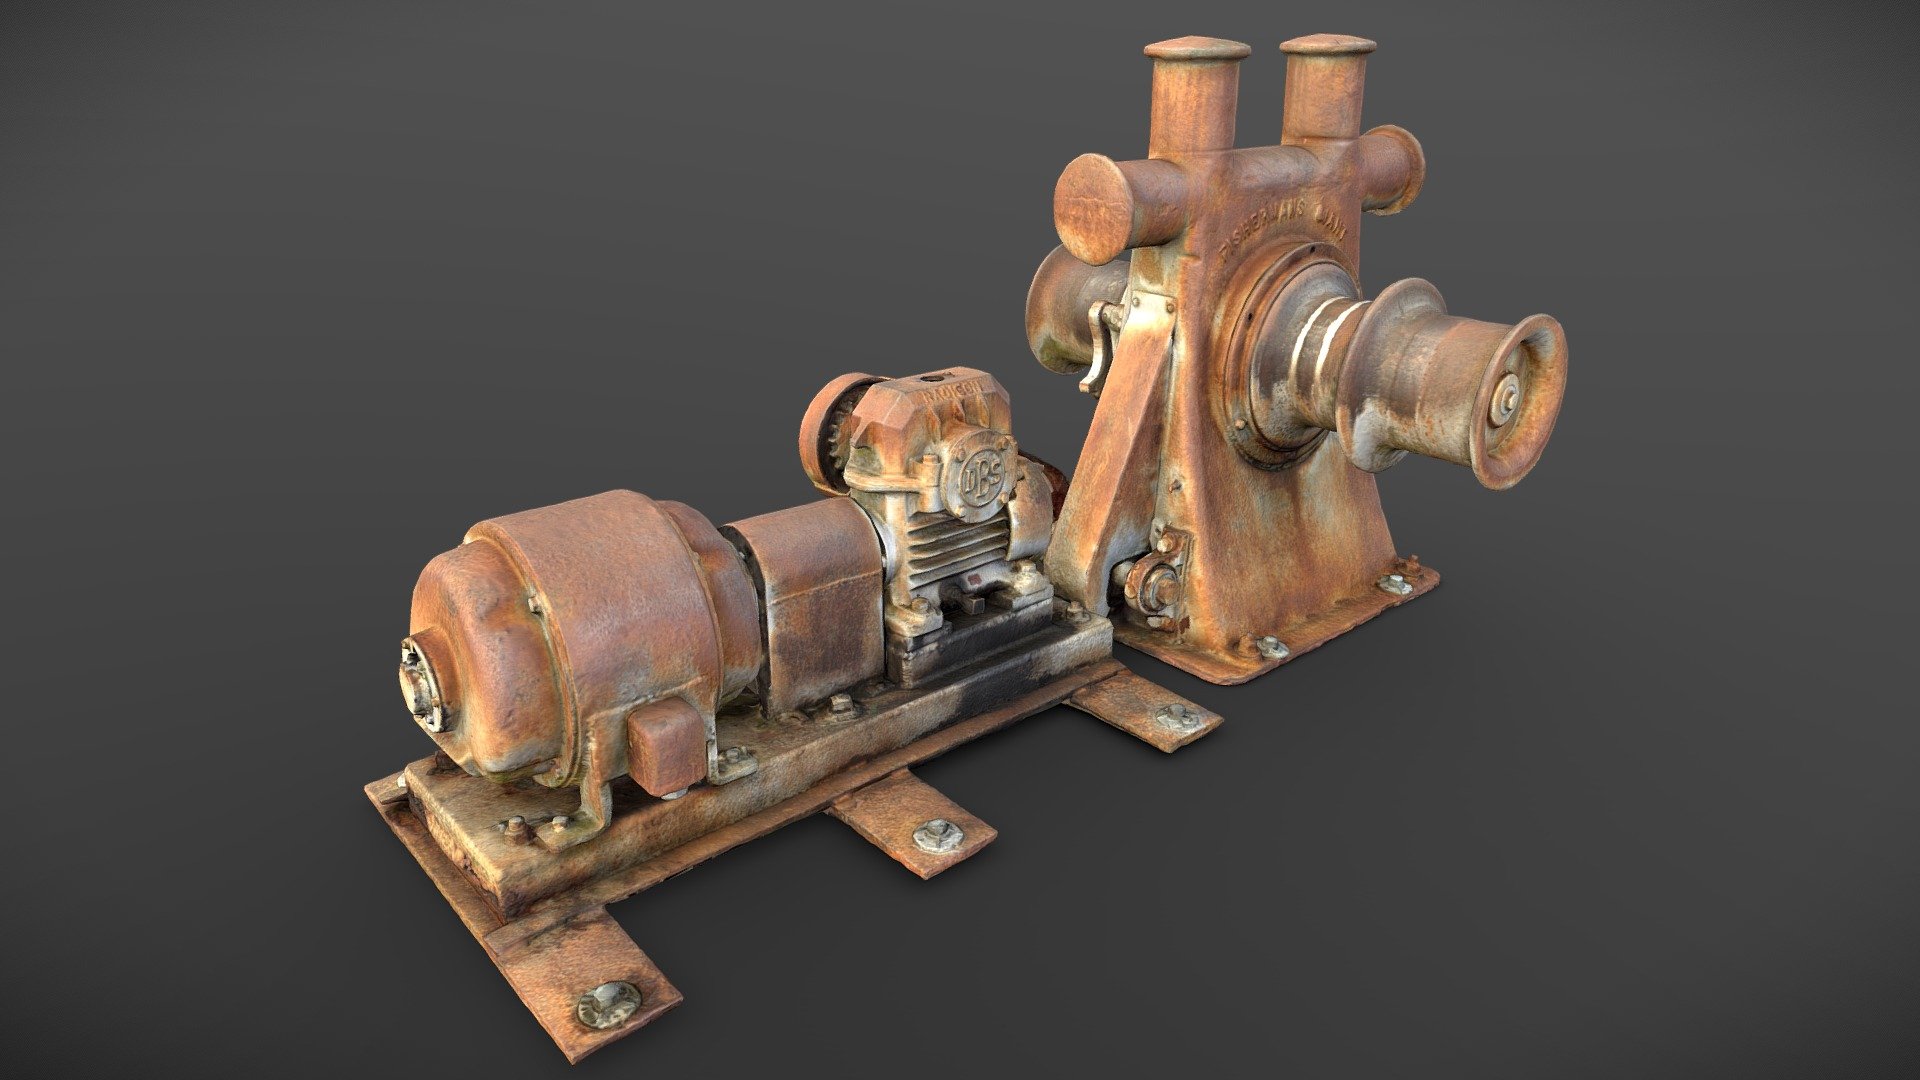 A weathered anchor windlass with a motor.

~20K points / ~50K triangles. 4 8K maps for diffuse, normal, spec and ambient occlusion.

from wikipedia:

&ldquo;A windlass is a machine used on ships that is used to let-out and heave-up equipment such as a ship's anchor or a fishing trawl. On some ships, it may be located in a specific room called the windlass room.

An anchor windlass is a machine that restrains and manipulates the anchor chain on a boat, allowing the anchor to be raised and lowered by means of chain cable. A notched wheel engages the links of the chain or the rope.